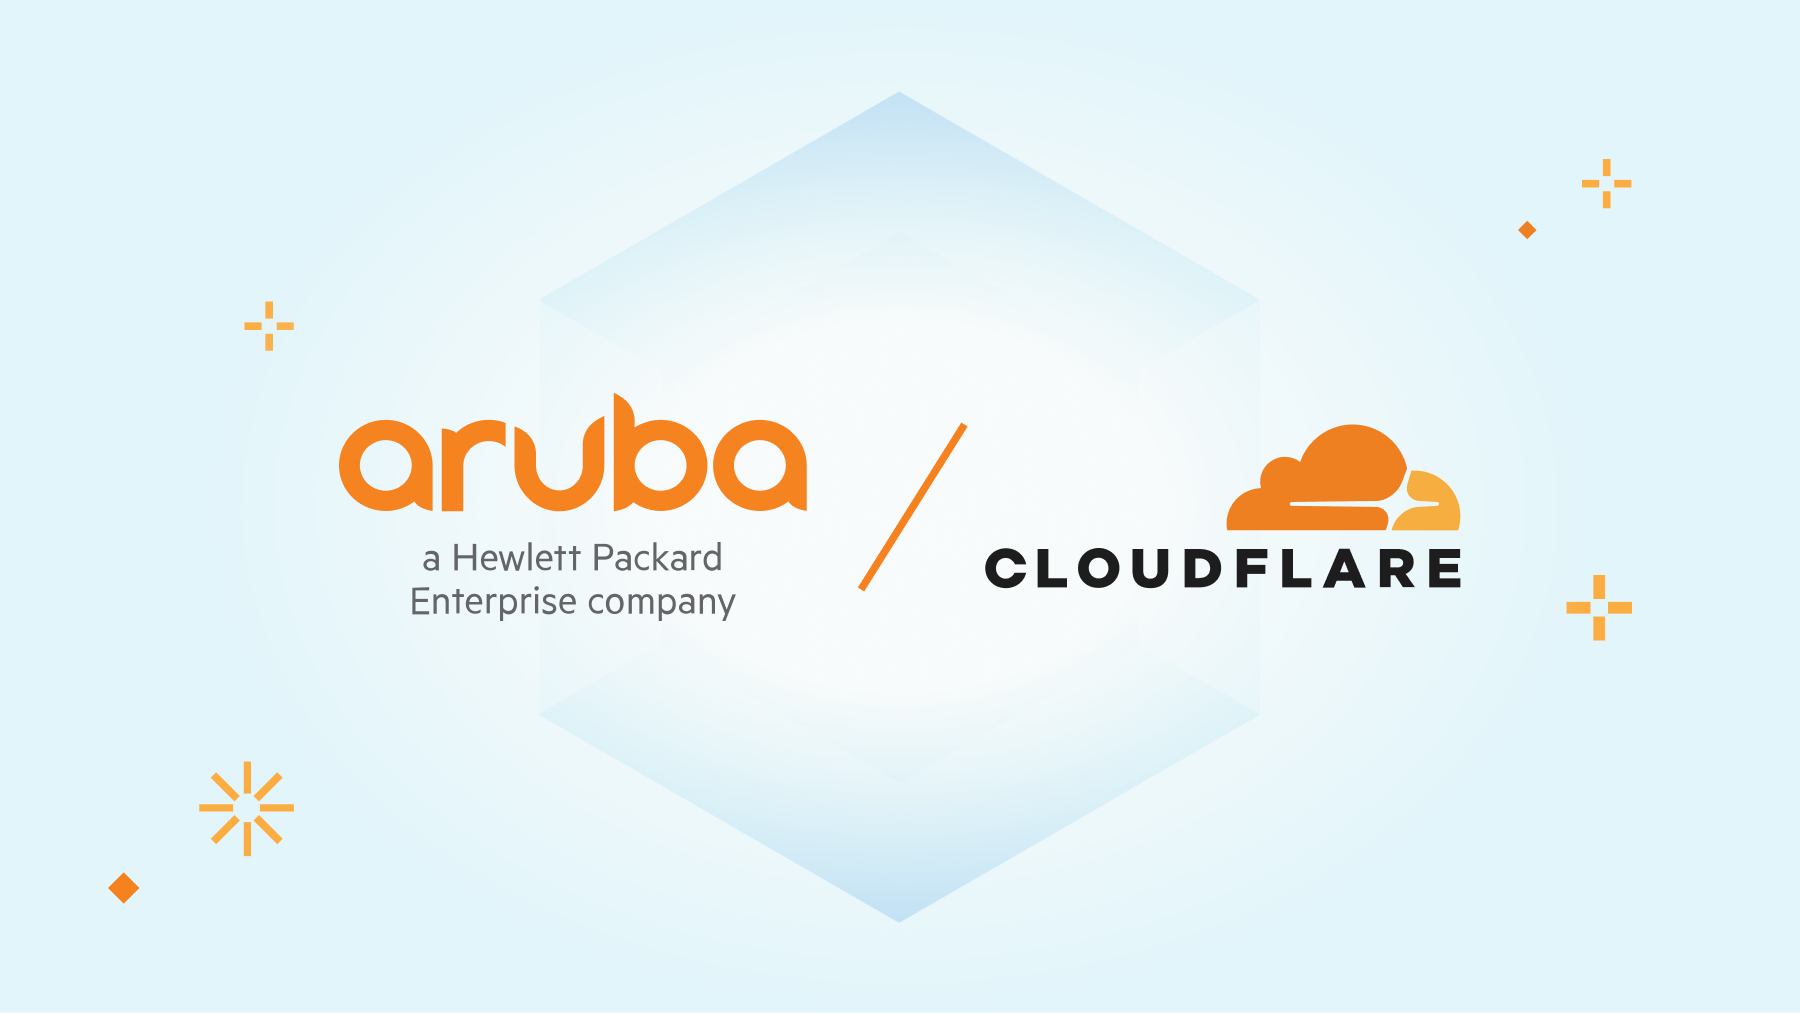 Cloudflare and Aruba partner to deliver a seamless global secure network from the branch to the cloud